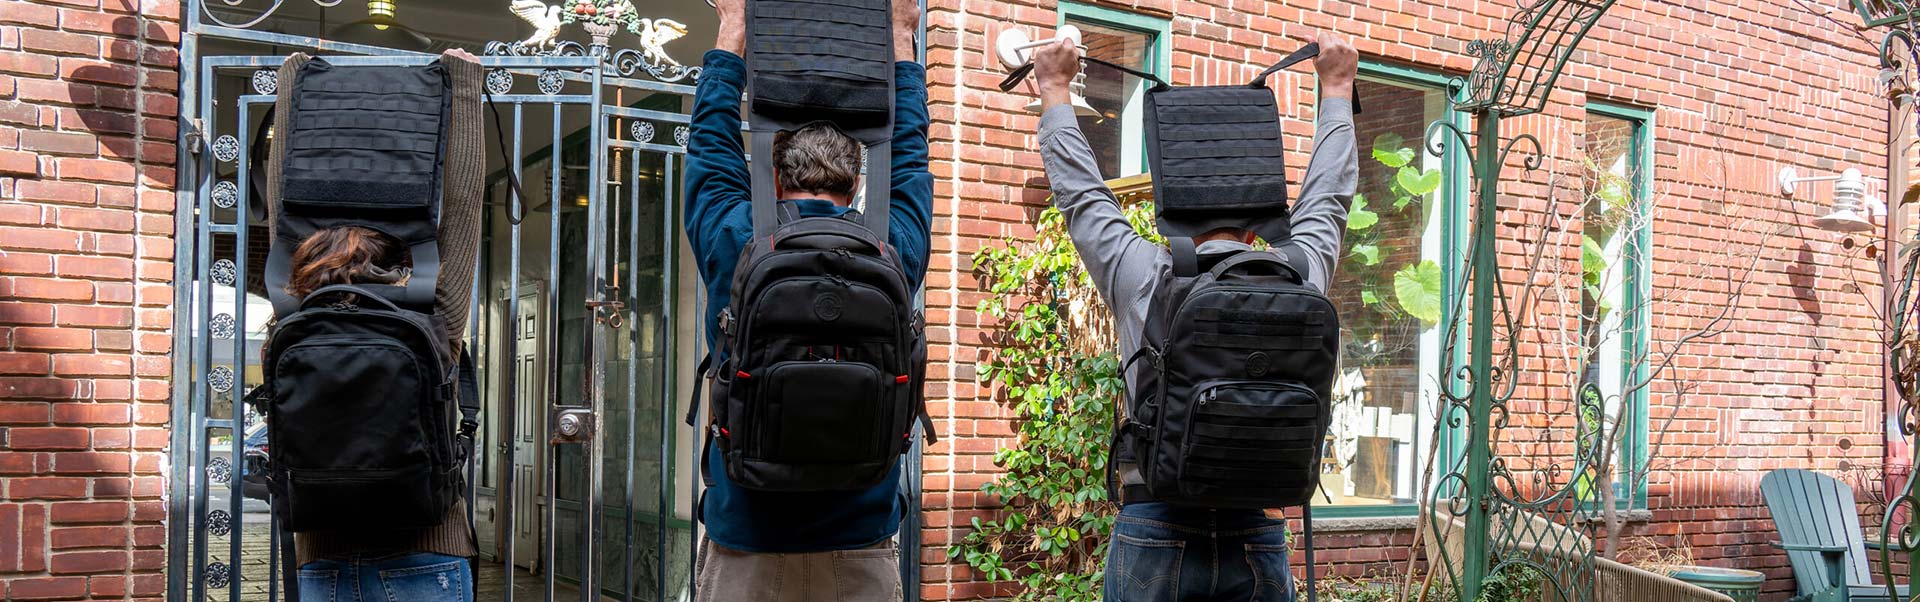 how to use your bulletproof backpack deployment front and back protection